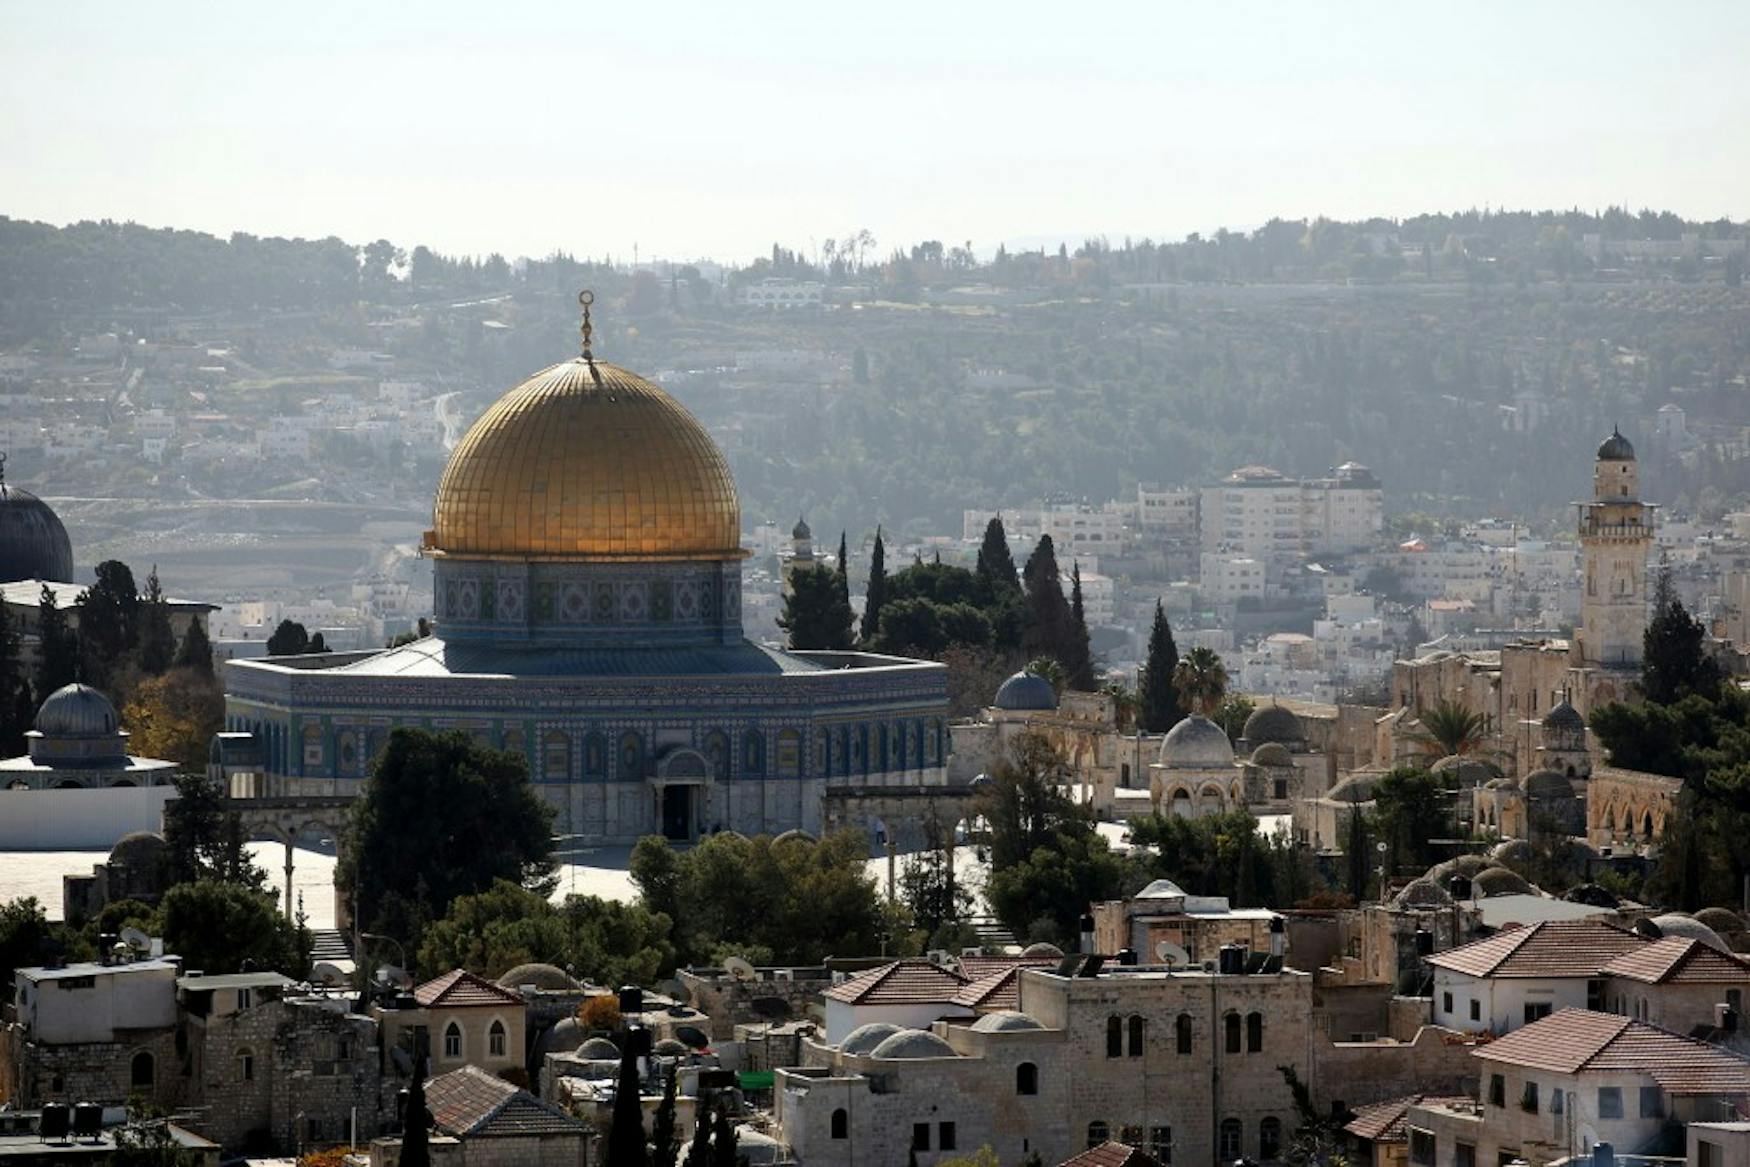 CAPITAL OF CULTURE: The Dome of the Rock was explained by Makiya as a spiritually -significant site for the three major Abrahamic religions and is located in Jerusalem, Israel. 